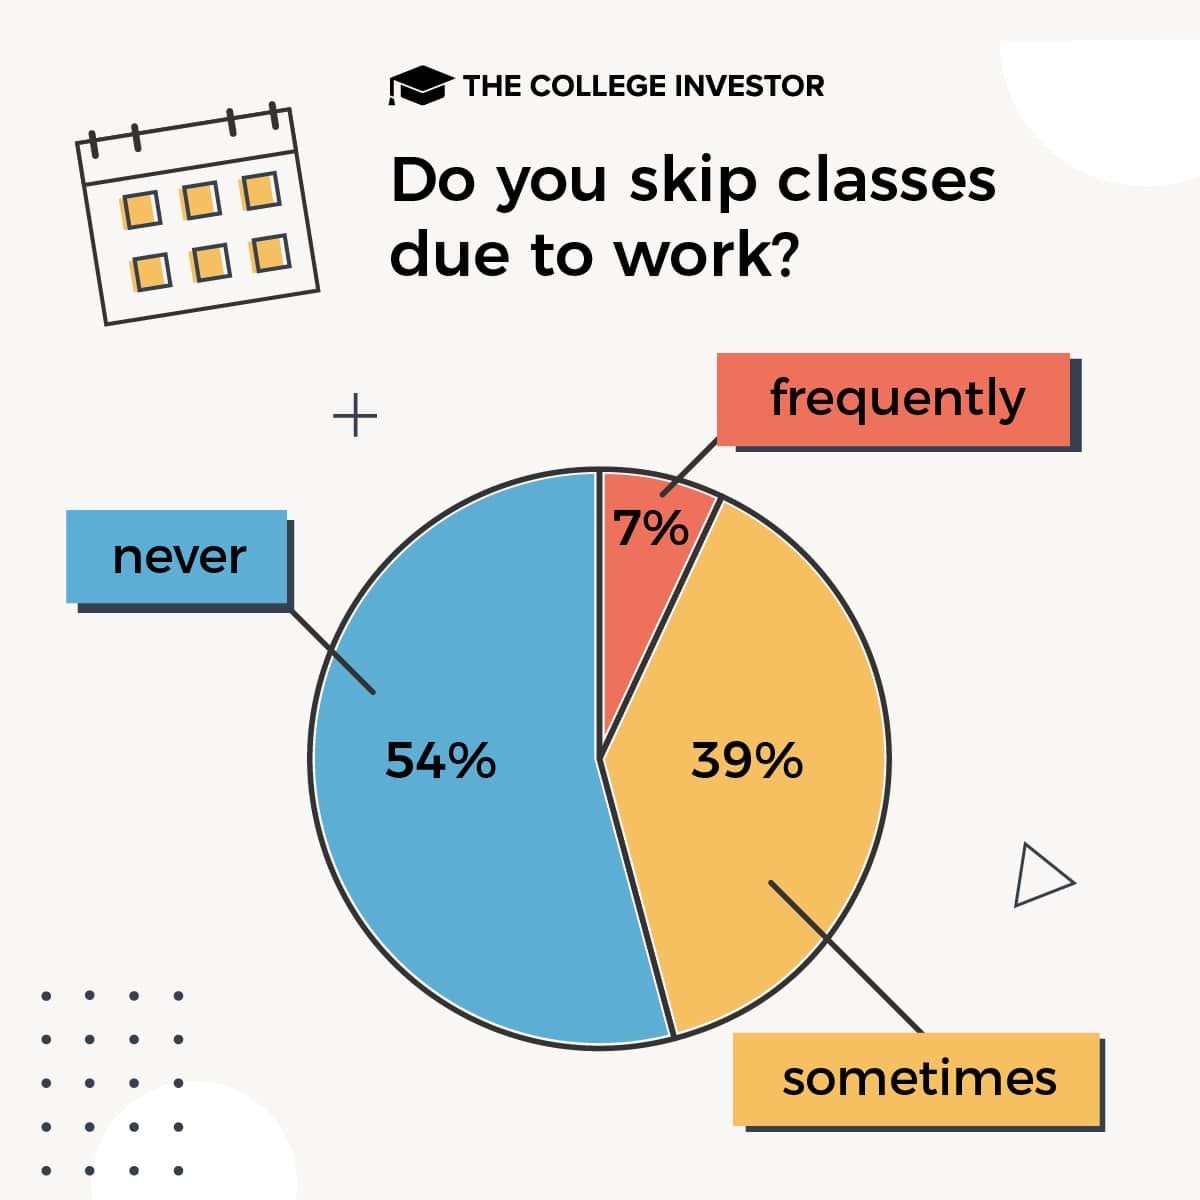 students choose to work survey results